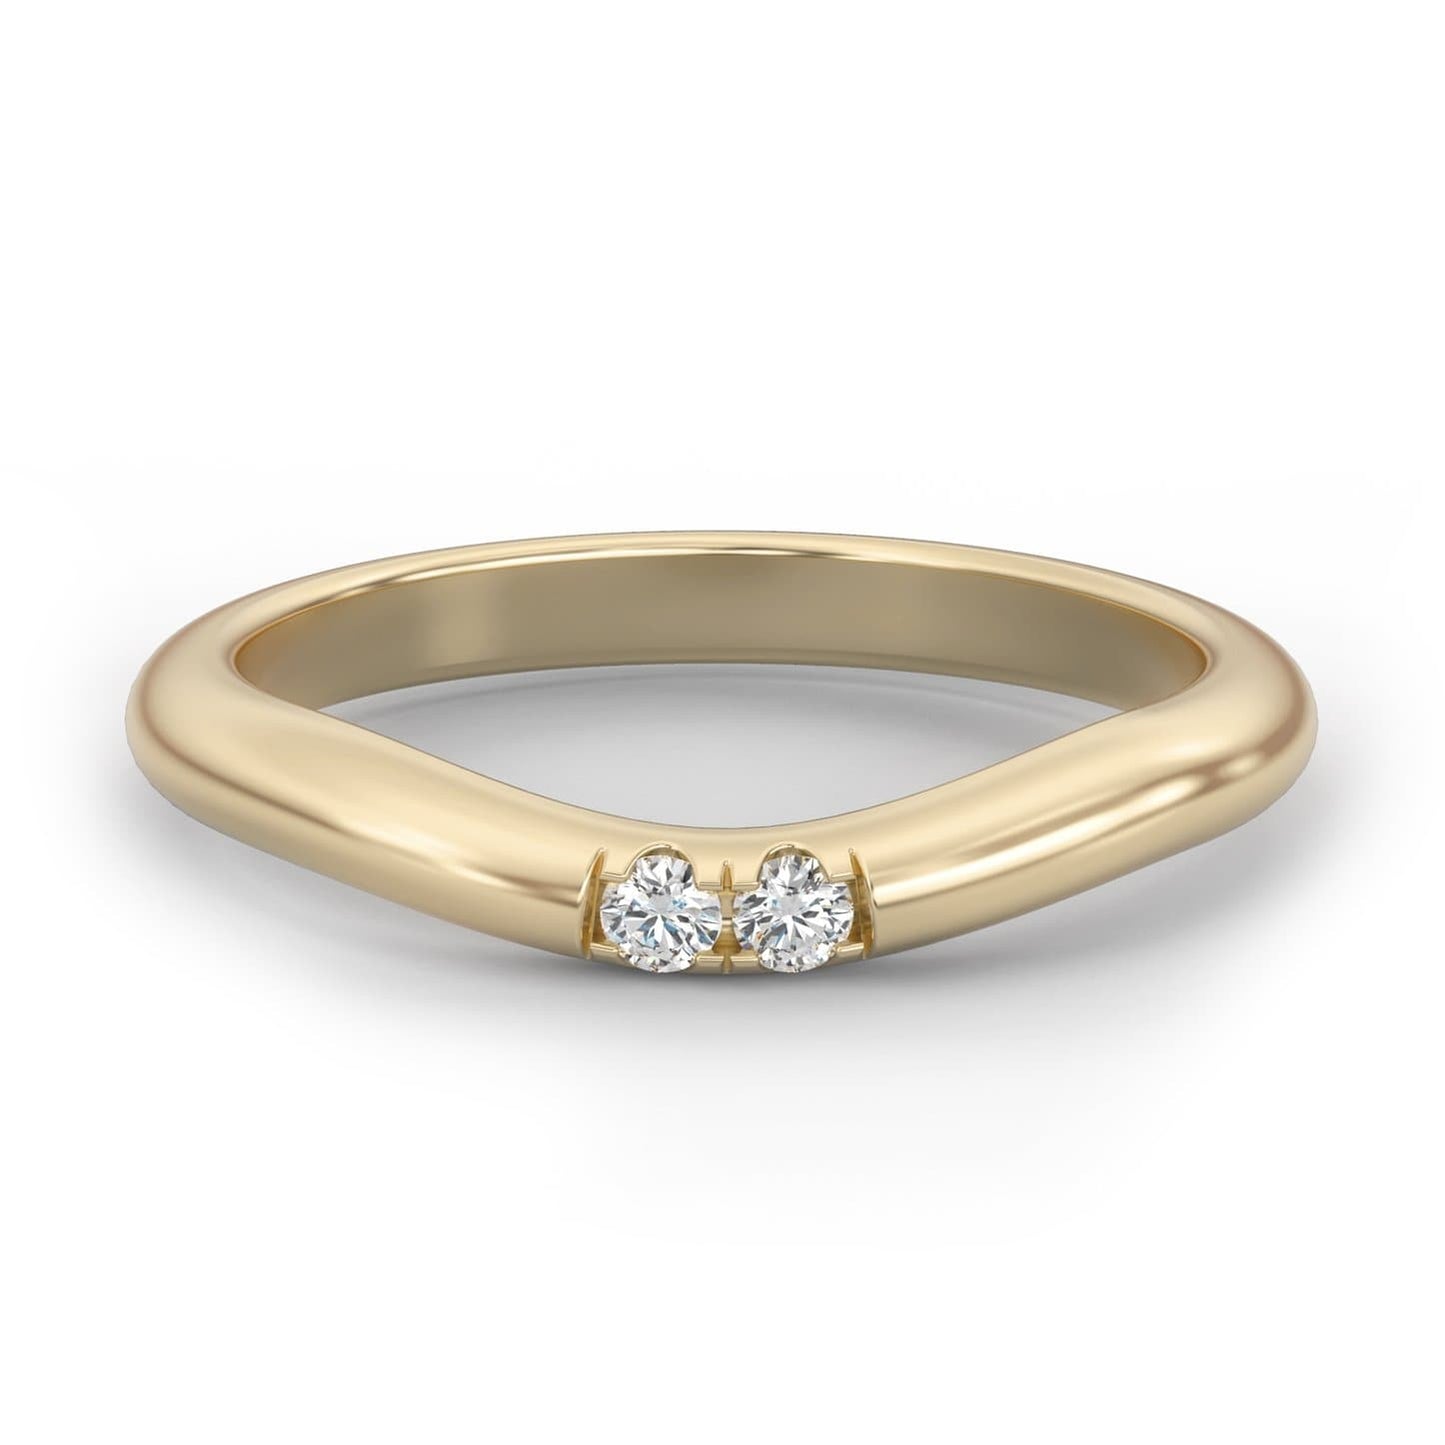 Contour Petite Curved Diamond Ring in 14k Gold